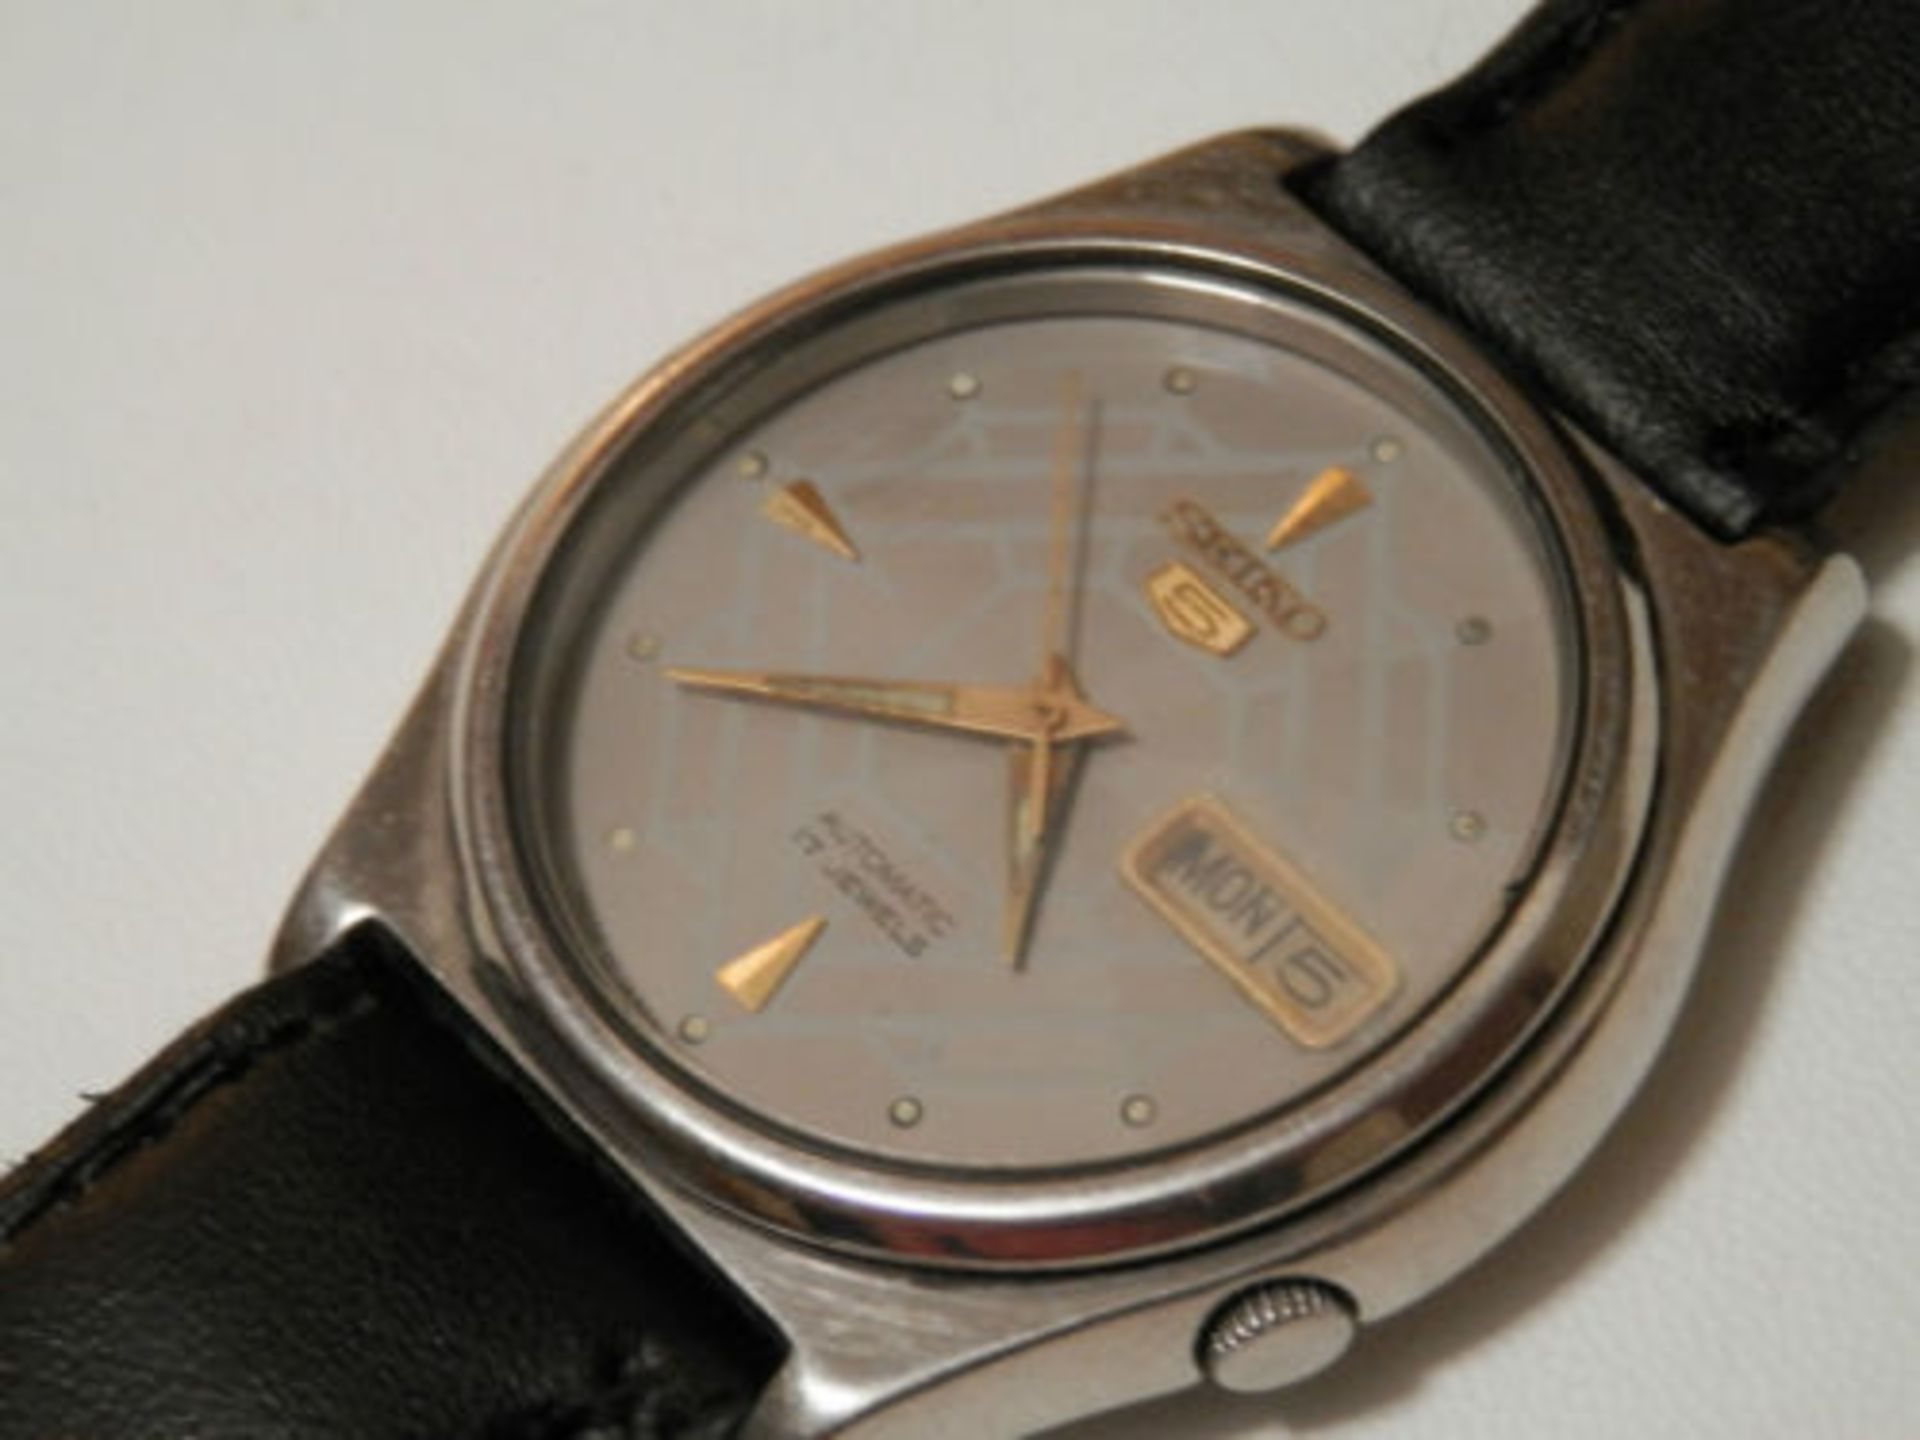 1984 WORKING SEIKO 7009 AUTOMATIC 17 JEWEL DAY/DATE WATCH, STAINLESS CASE. - Image 8 of 13